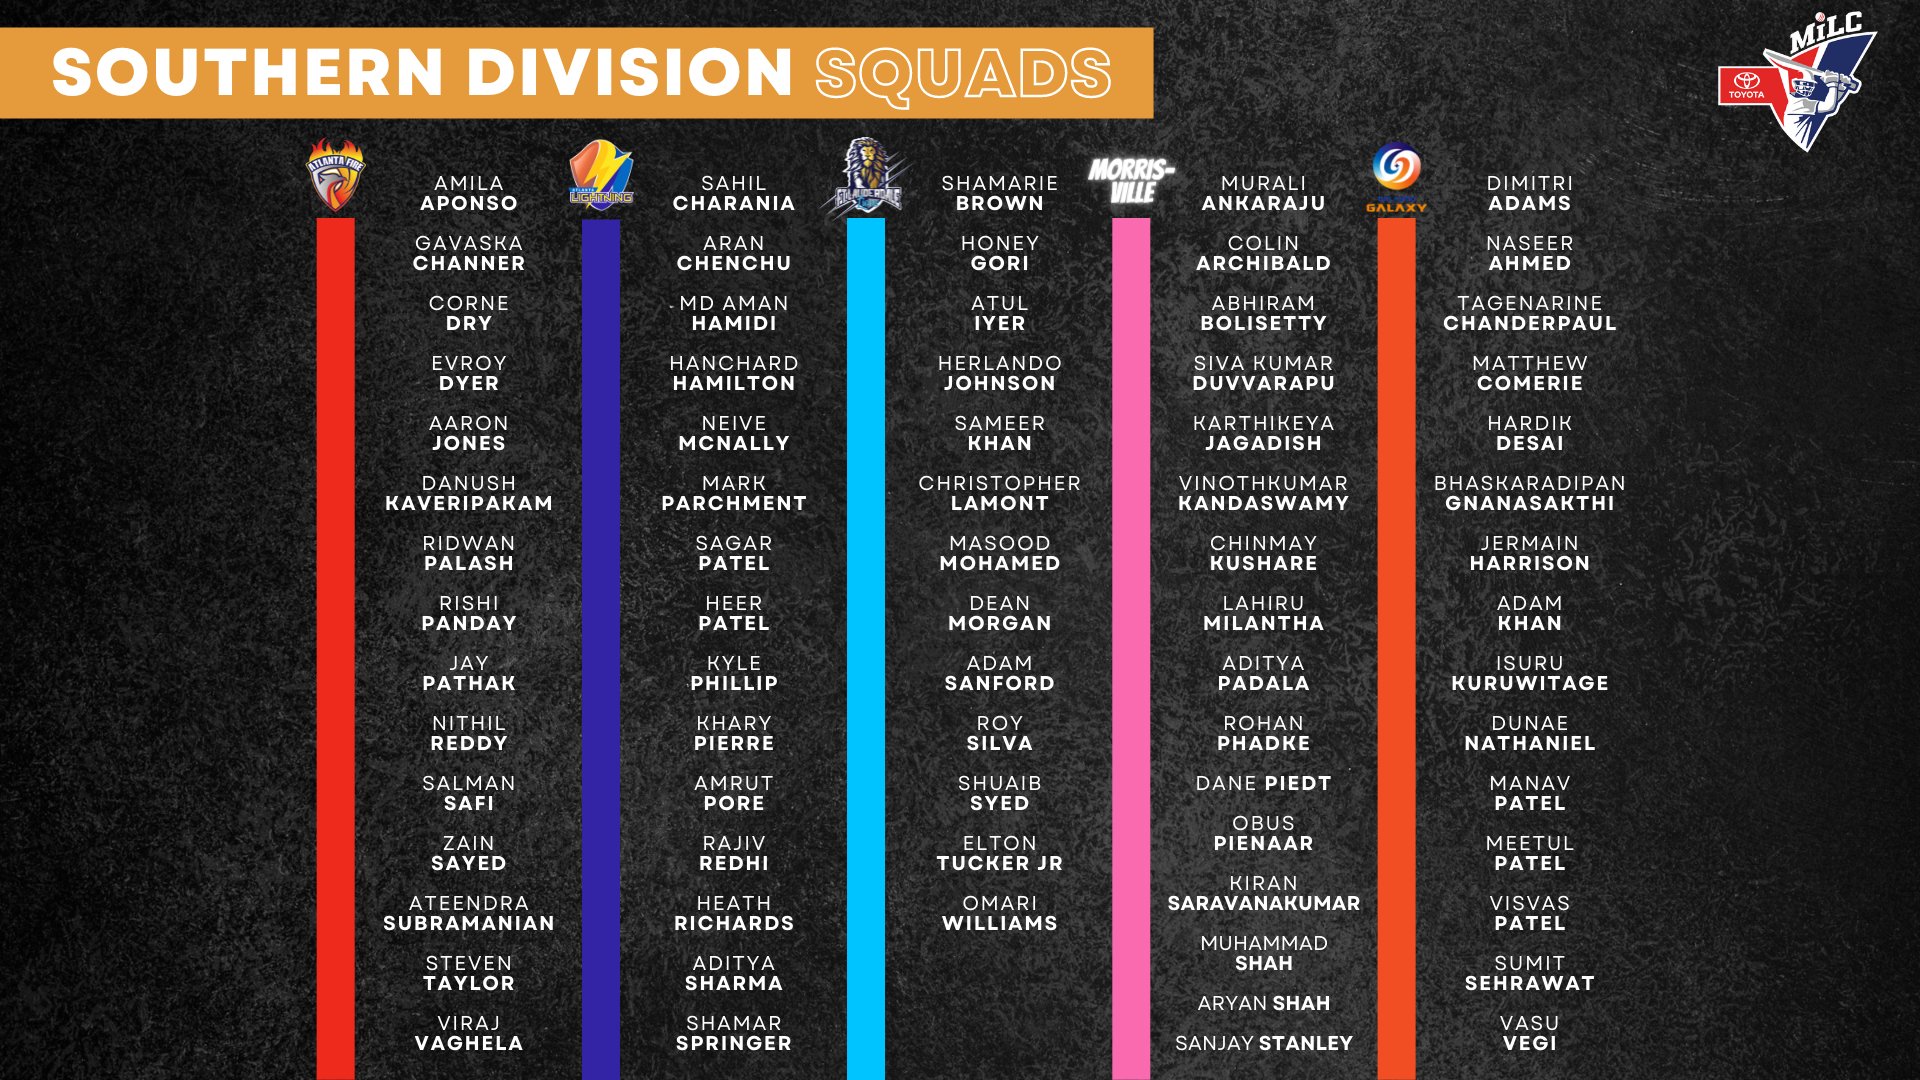 Southern Division Squads